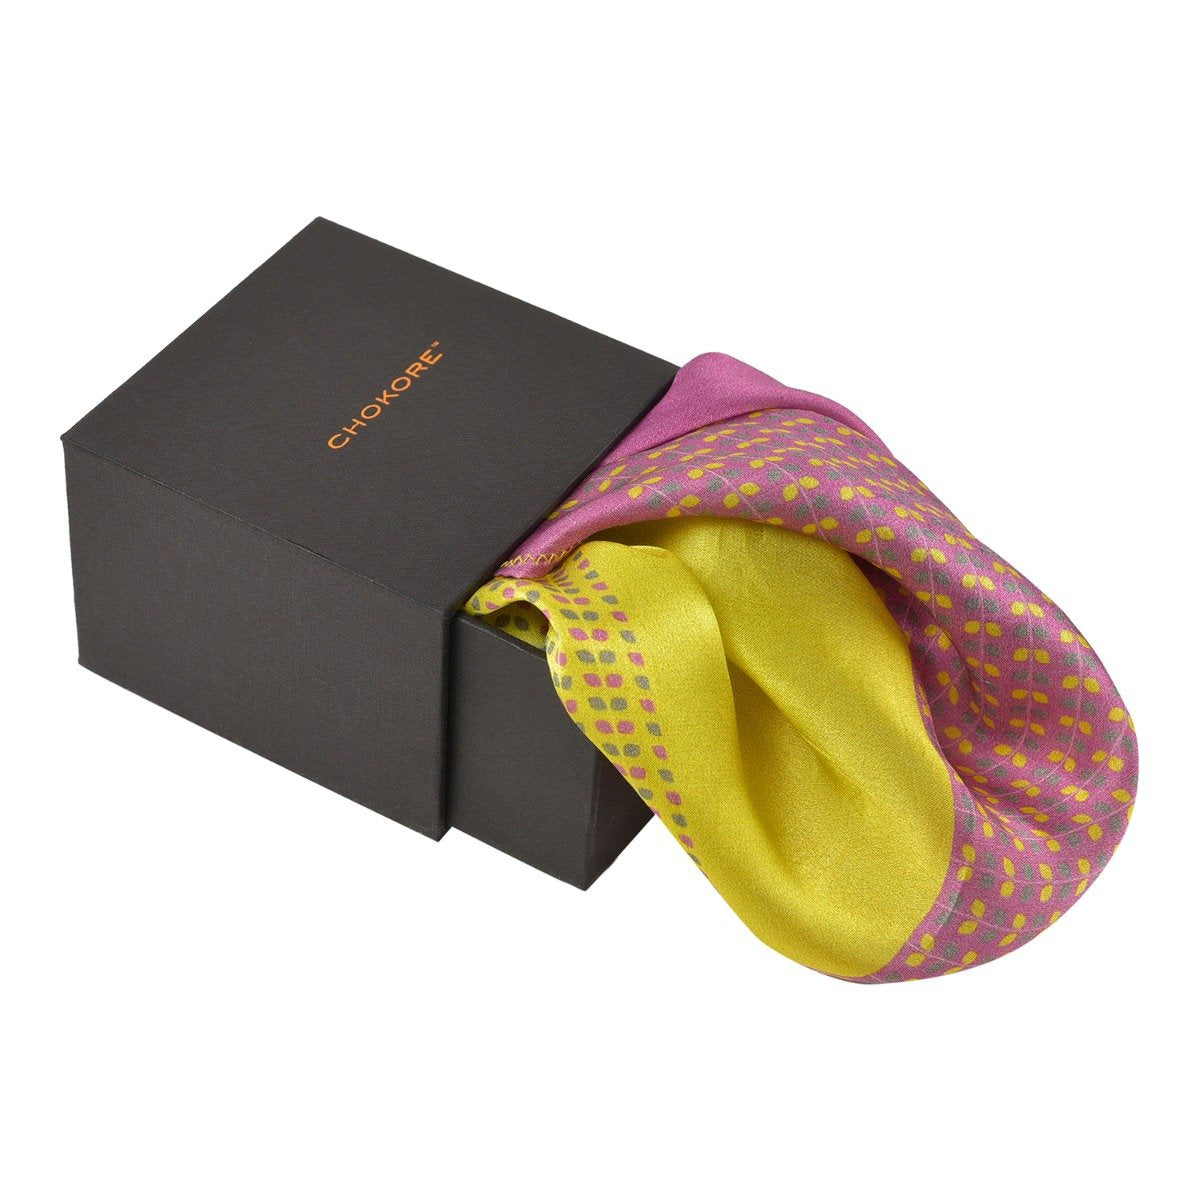 Chokore 2-in-1 Yellow & Purple Pocket Square - Indian At Heart line